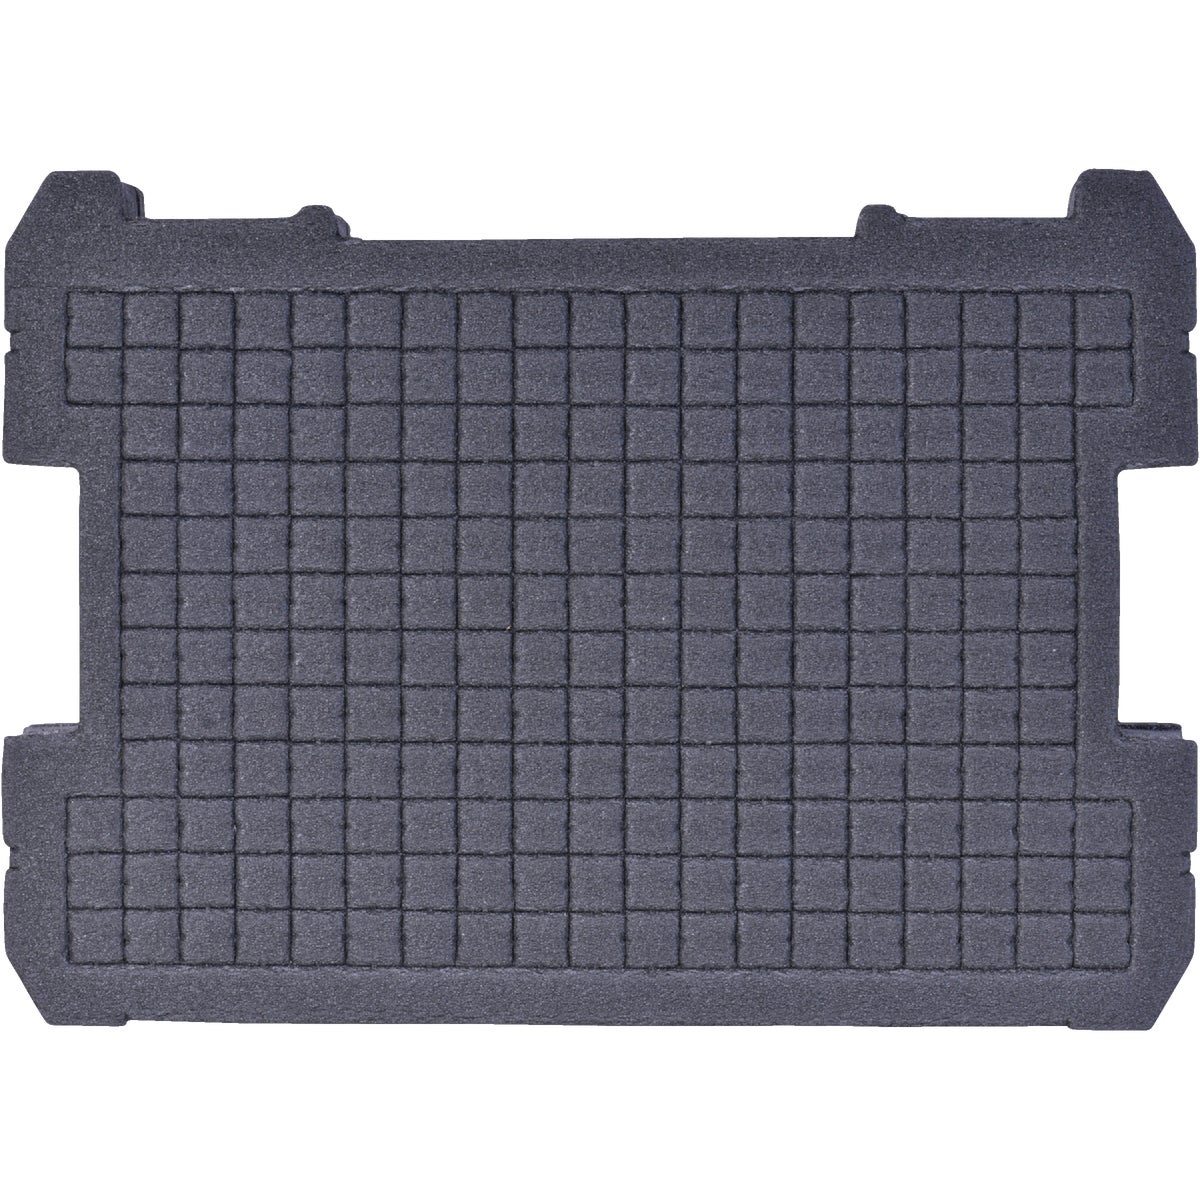 Item 302071, The TSTAK foam insert is an auxiliary product to the TSTAK tool storage 